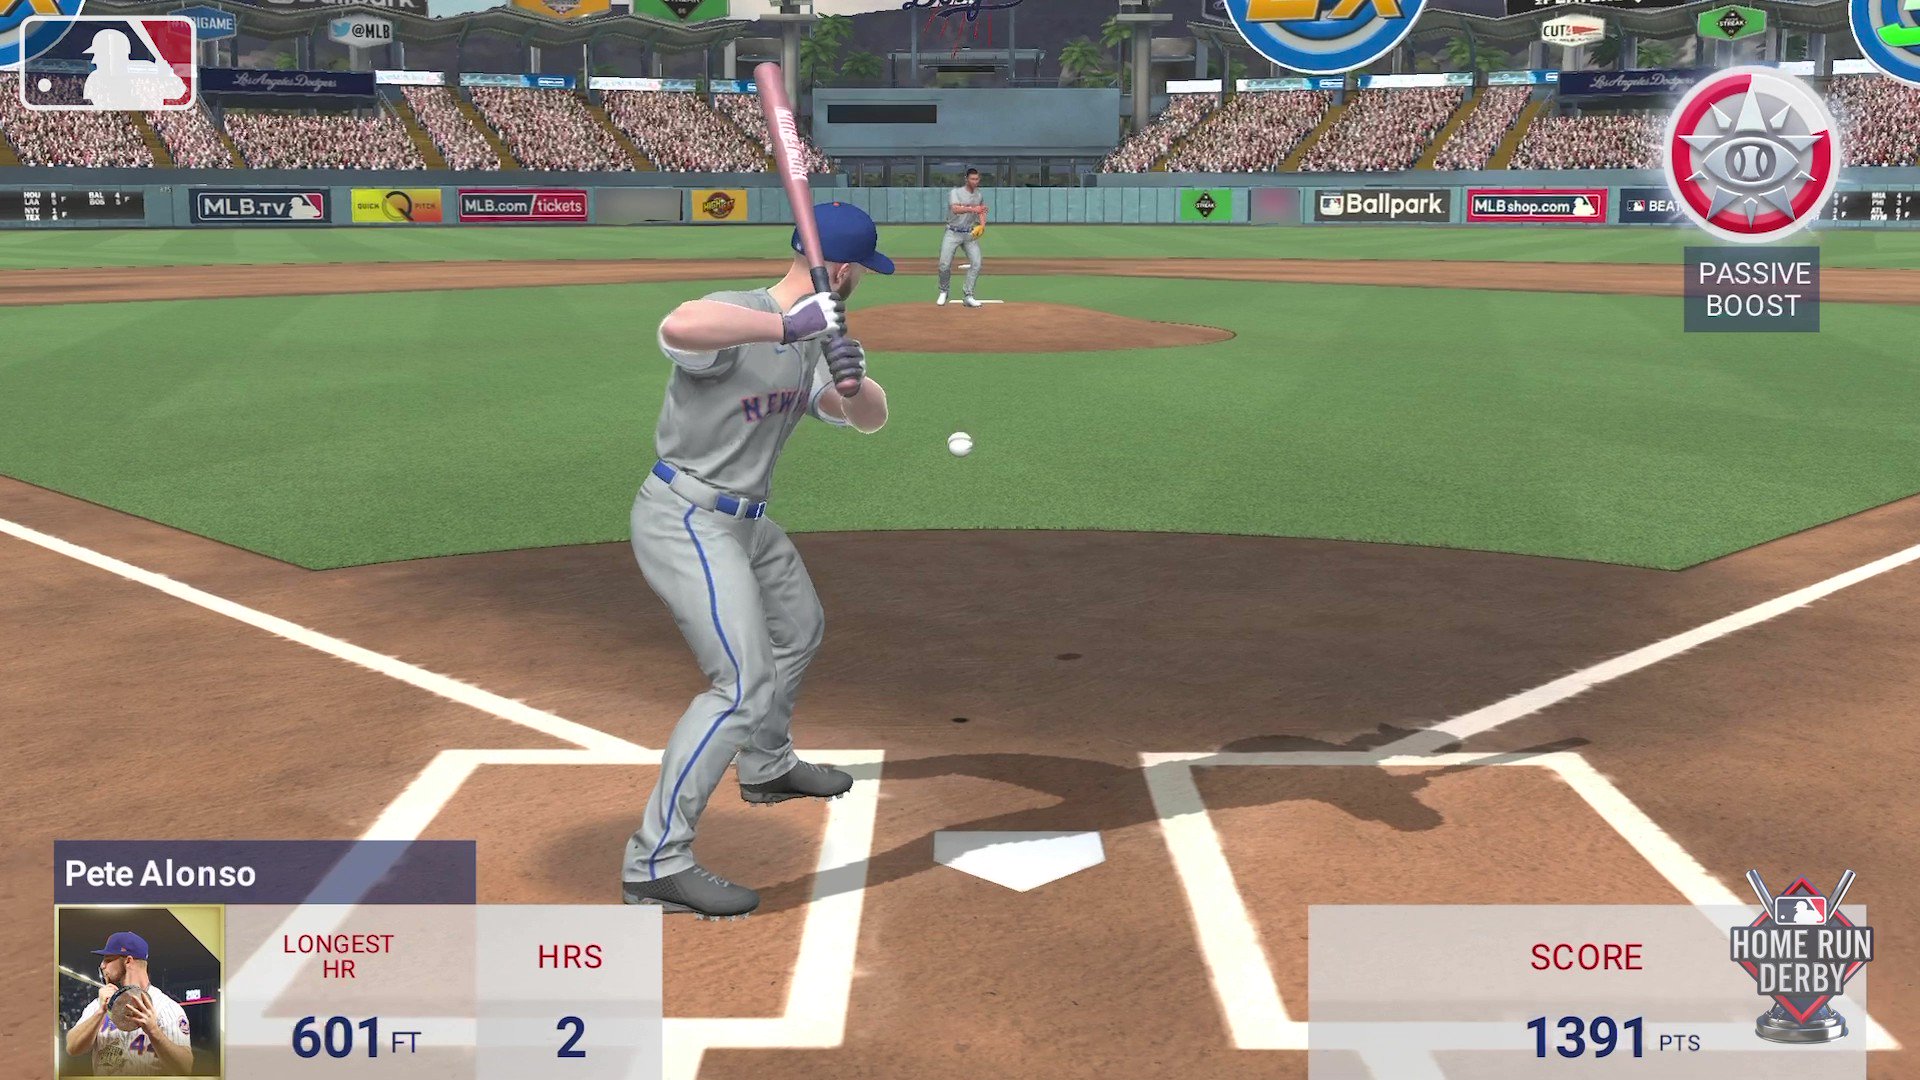 MLB to Host Second Annual Home Run Derby in VR for AllStar Week 2019